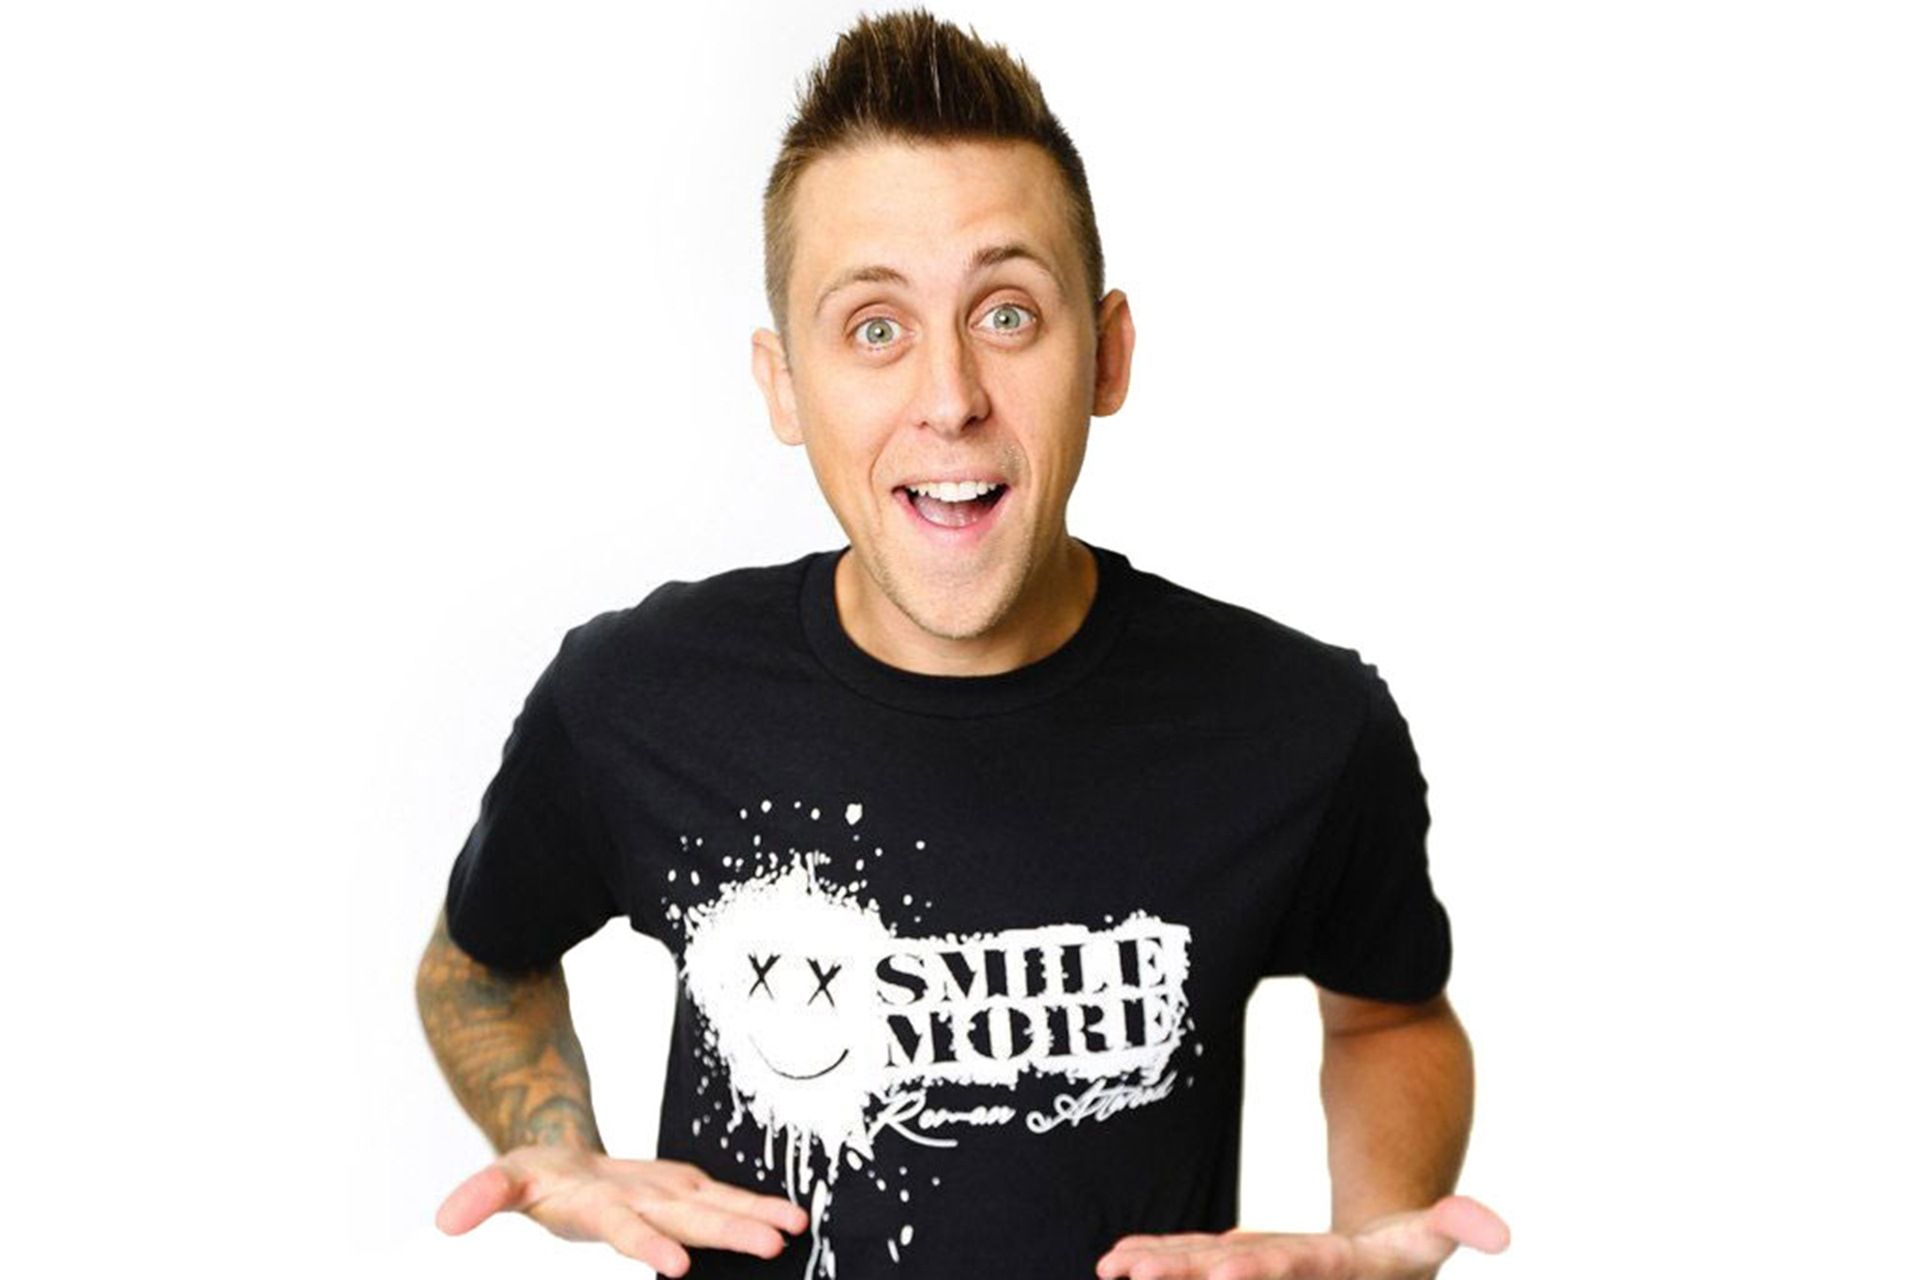 Roman Atwood Wallpaper HD Background Free Download